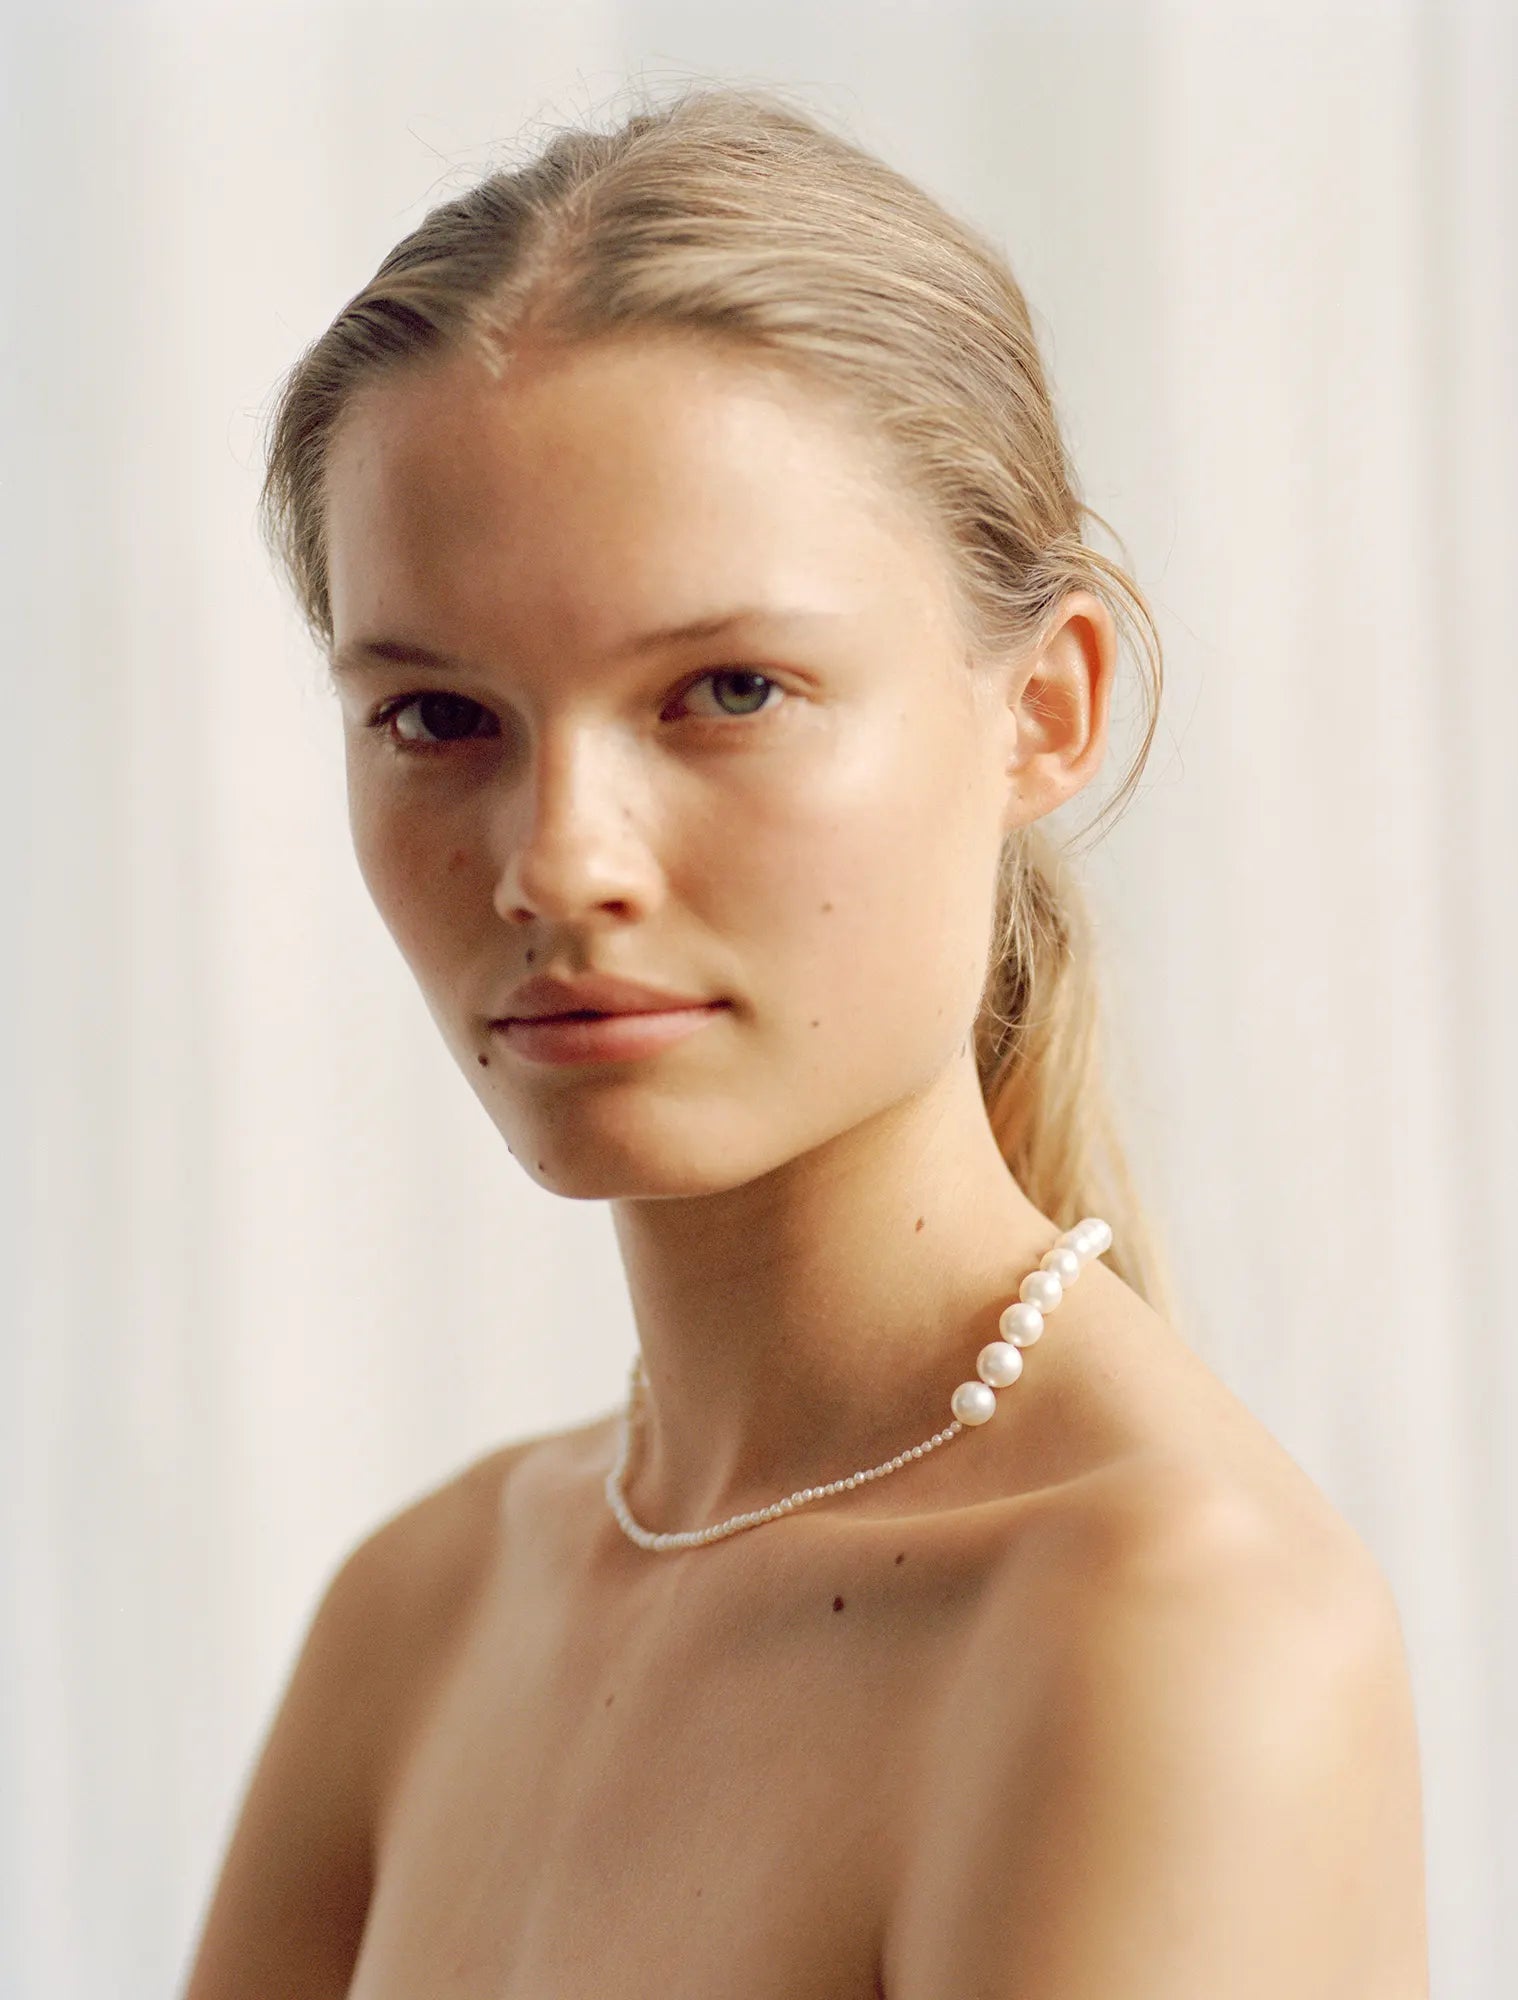 Blonde model wearing Peggy pearl necklace